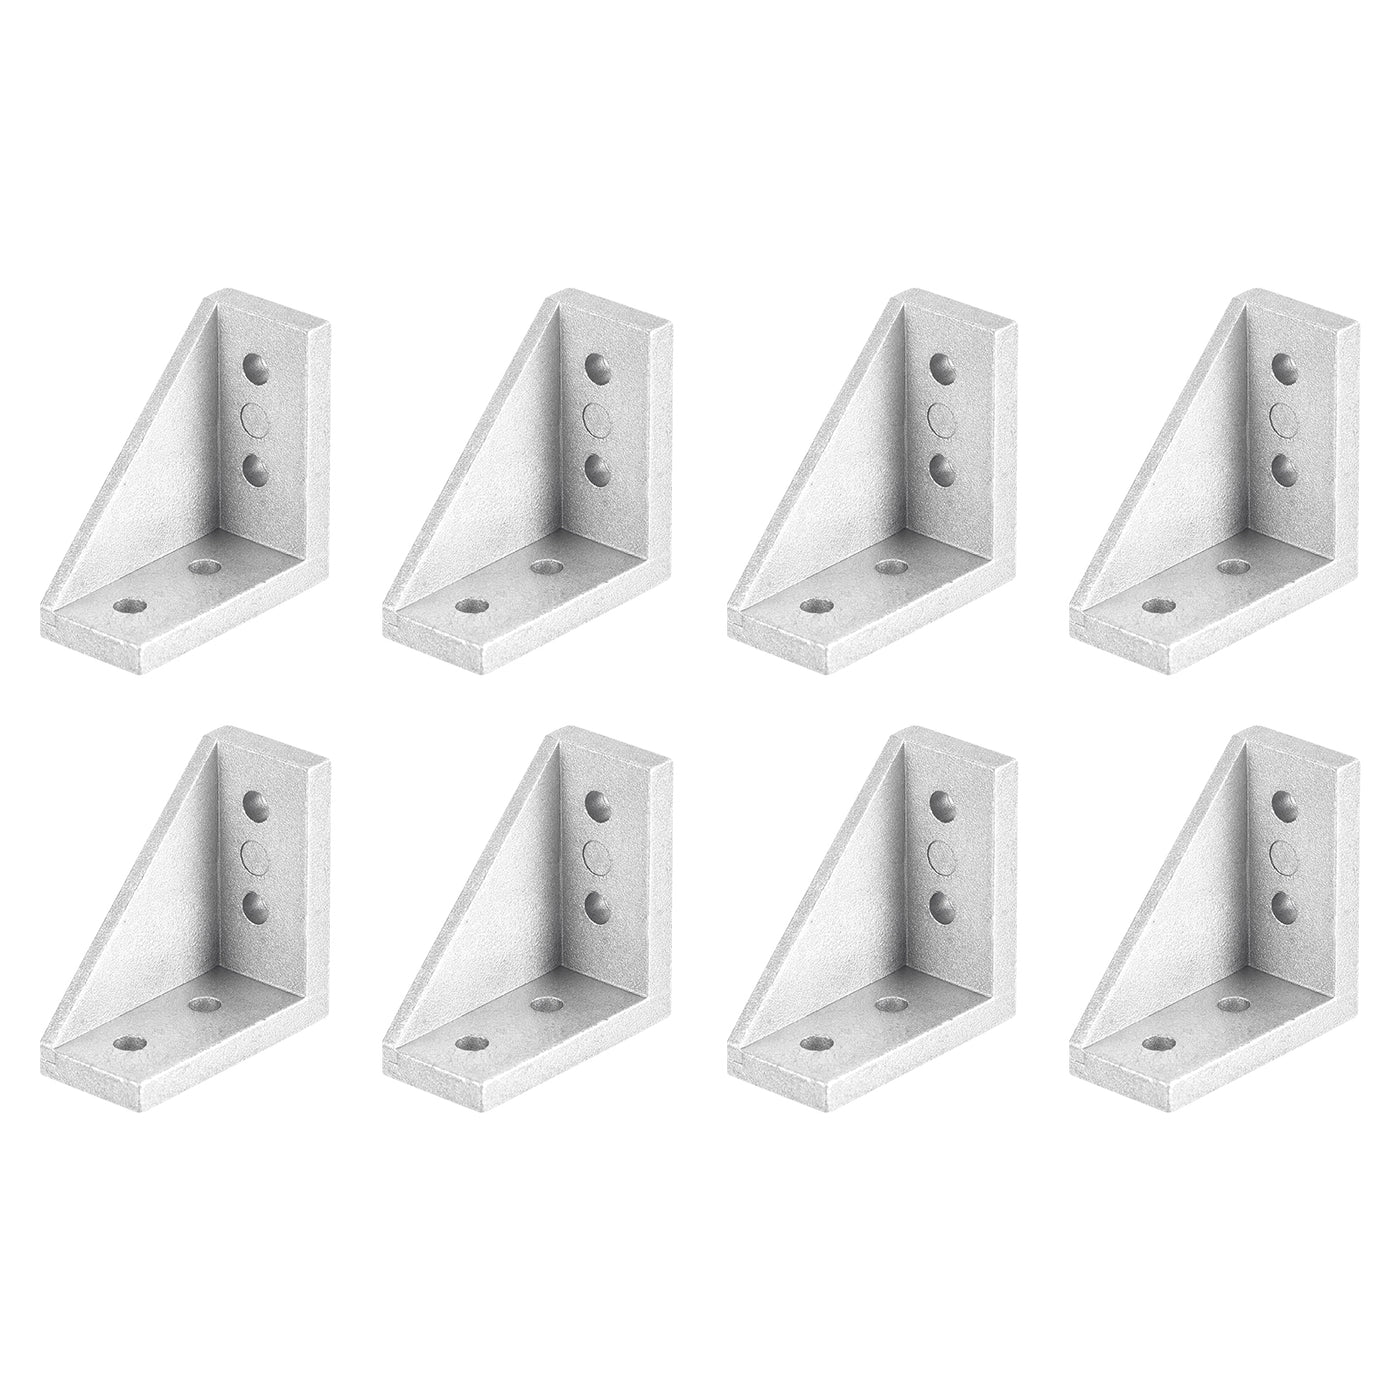 uxcell Uxcell 8Pcs Inside Corner Bracket Gusset, 38x38x18mm 2040 Angle Connectors for 2020/2040 Series Aluminum Extrusion Profile Silver